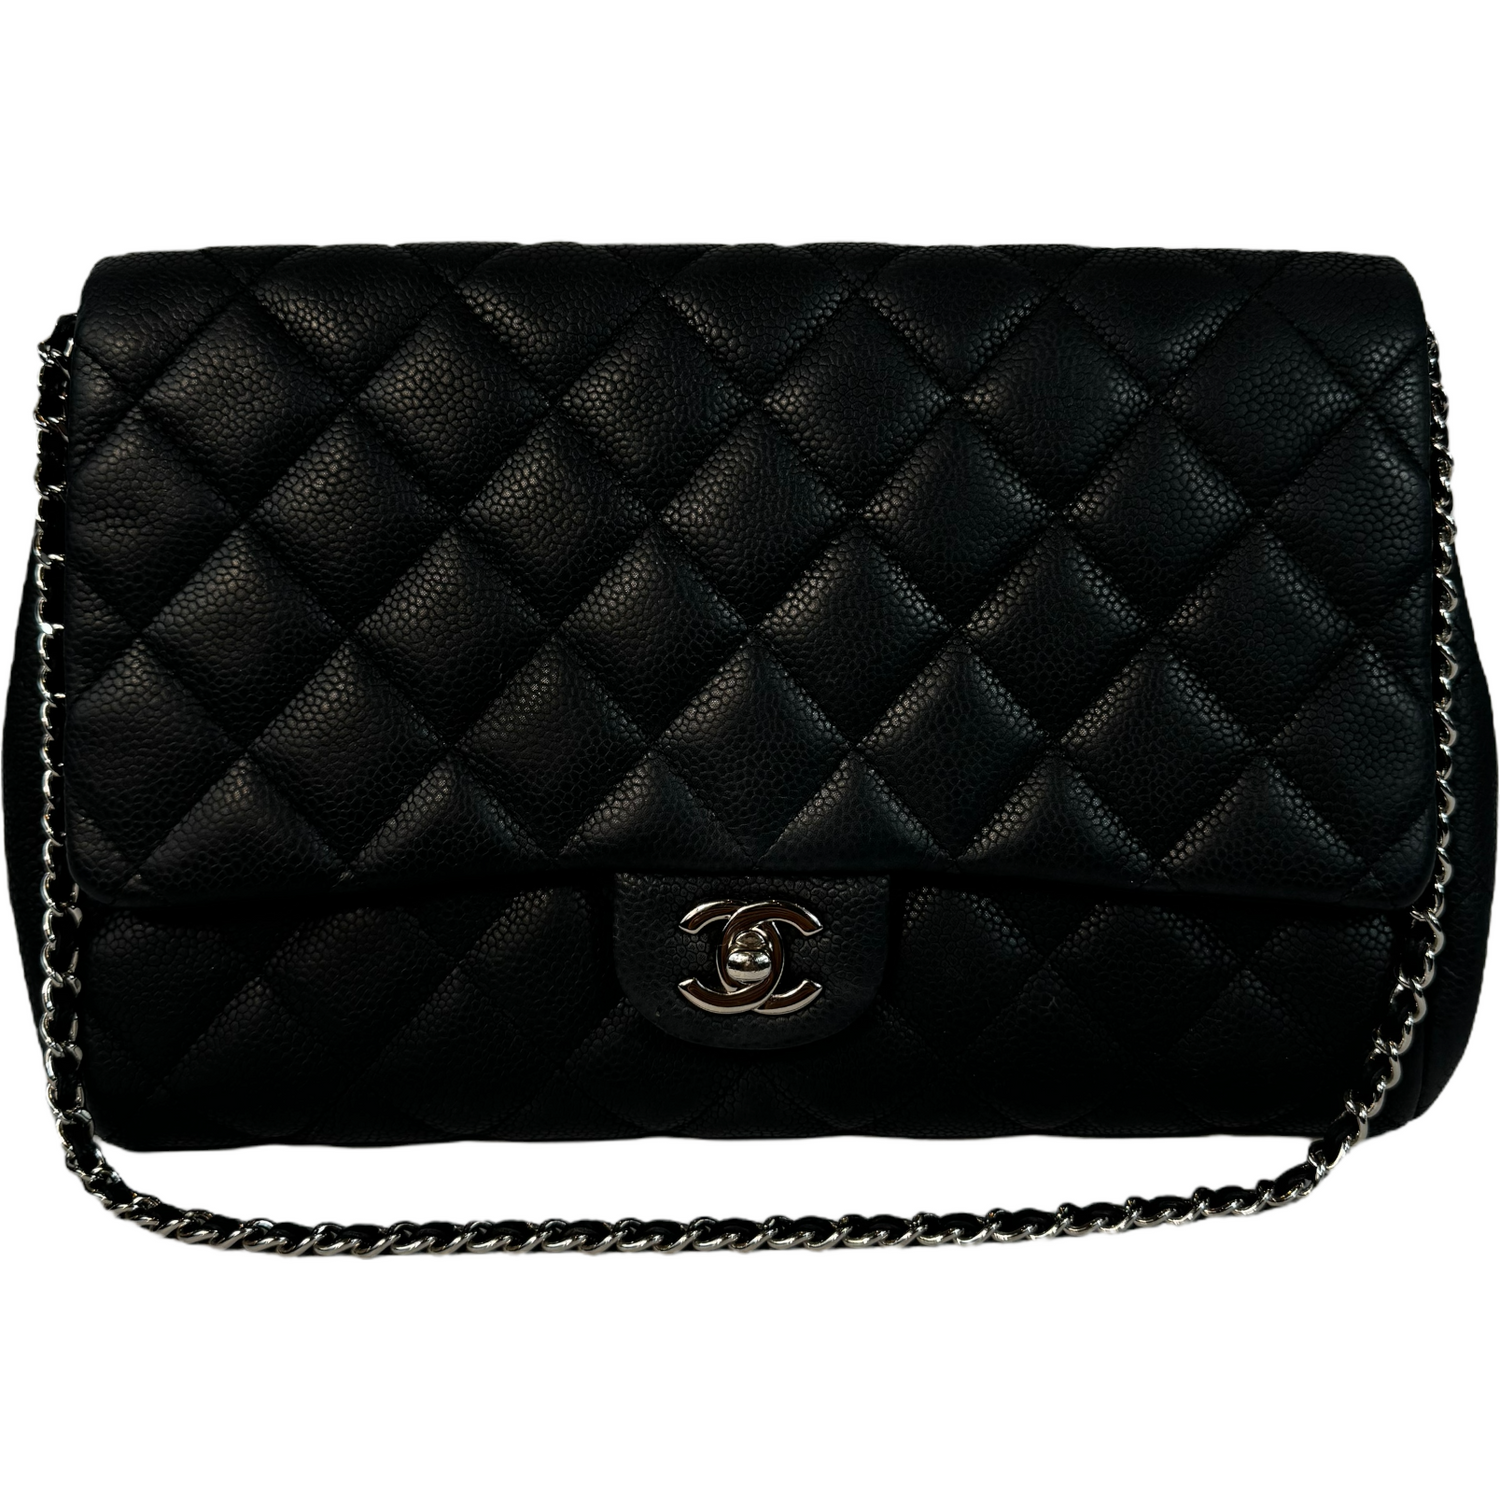 CHANEL - Black Timeless Classic Bag/Clutch in Caviar with Silver Hardware